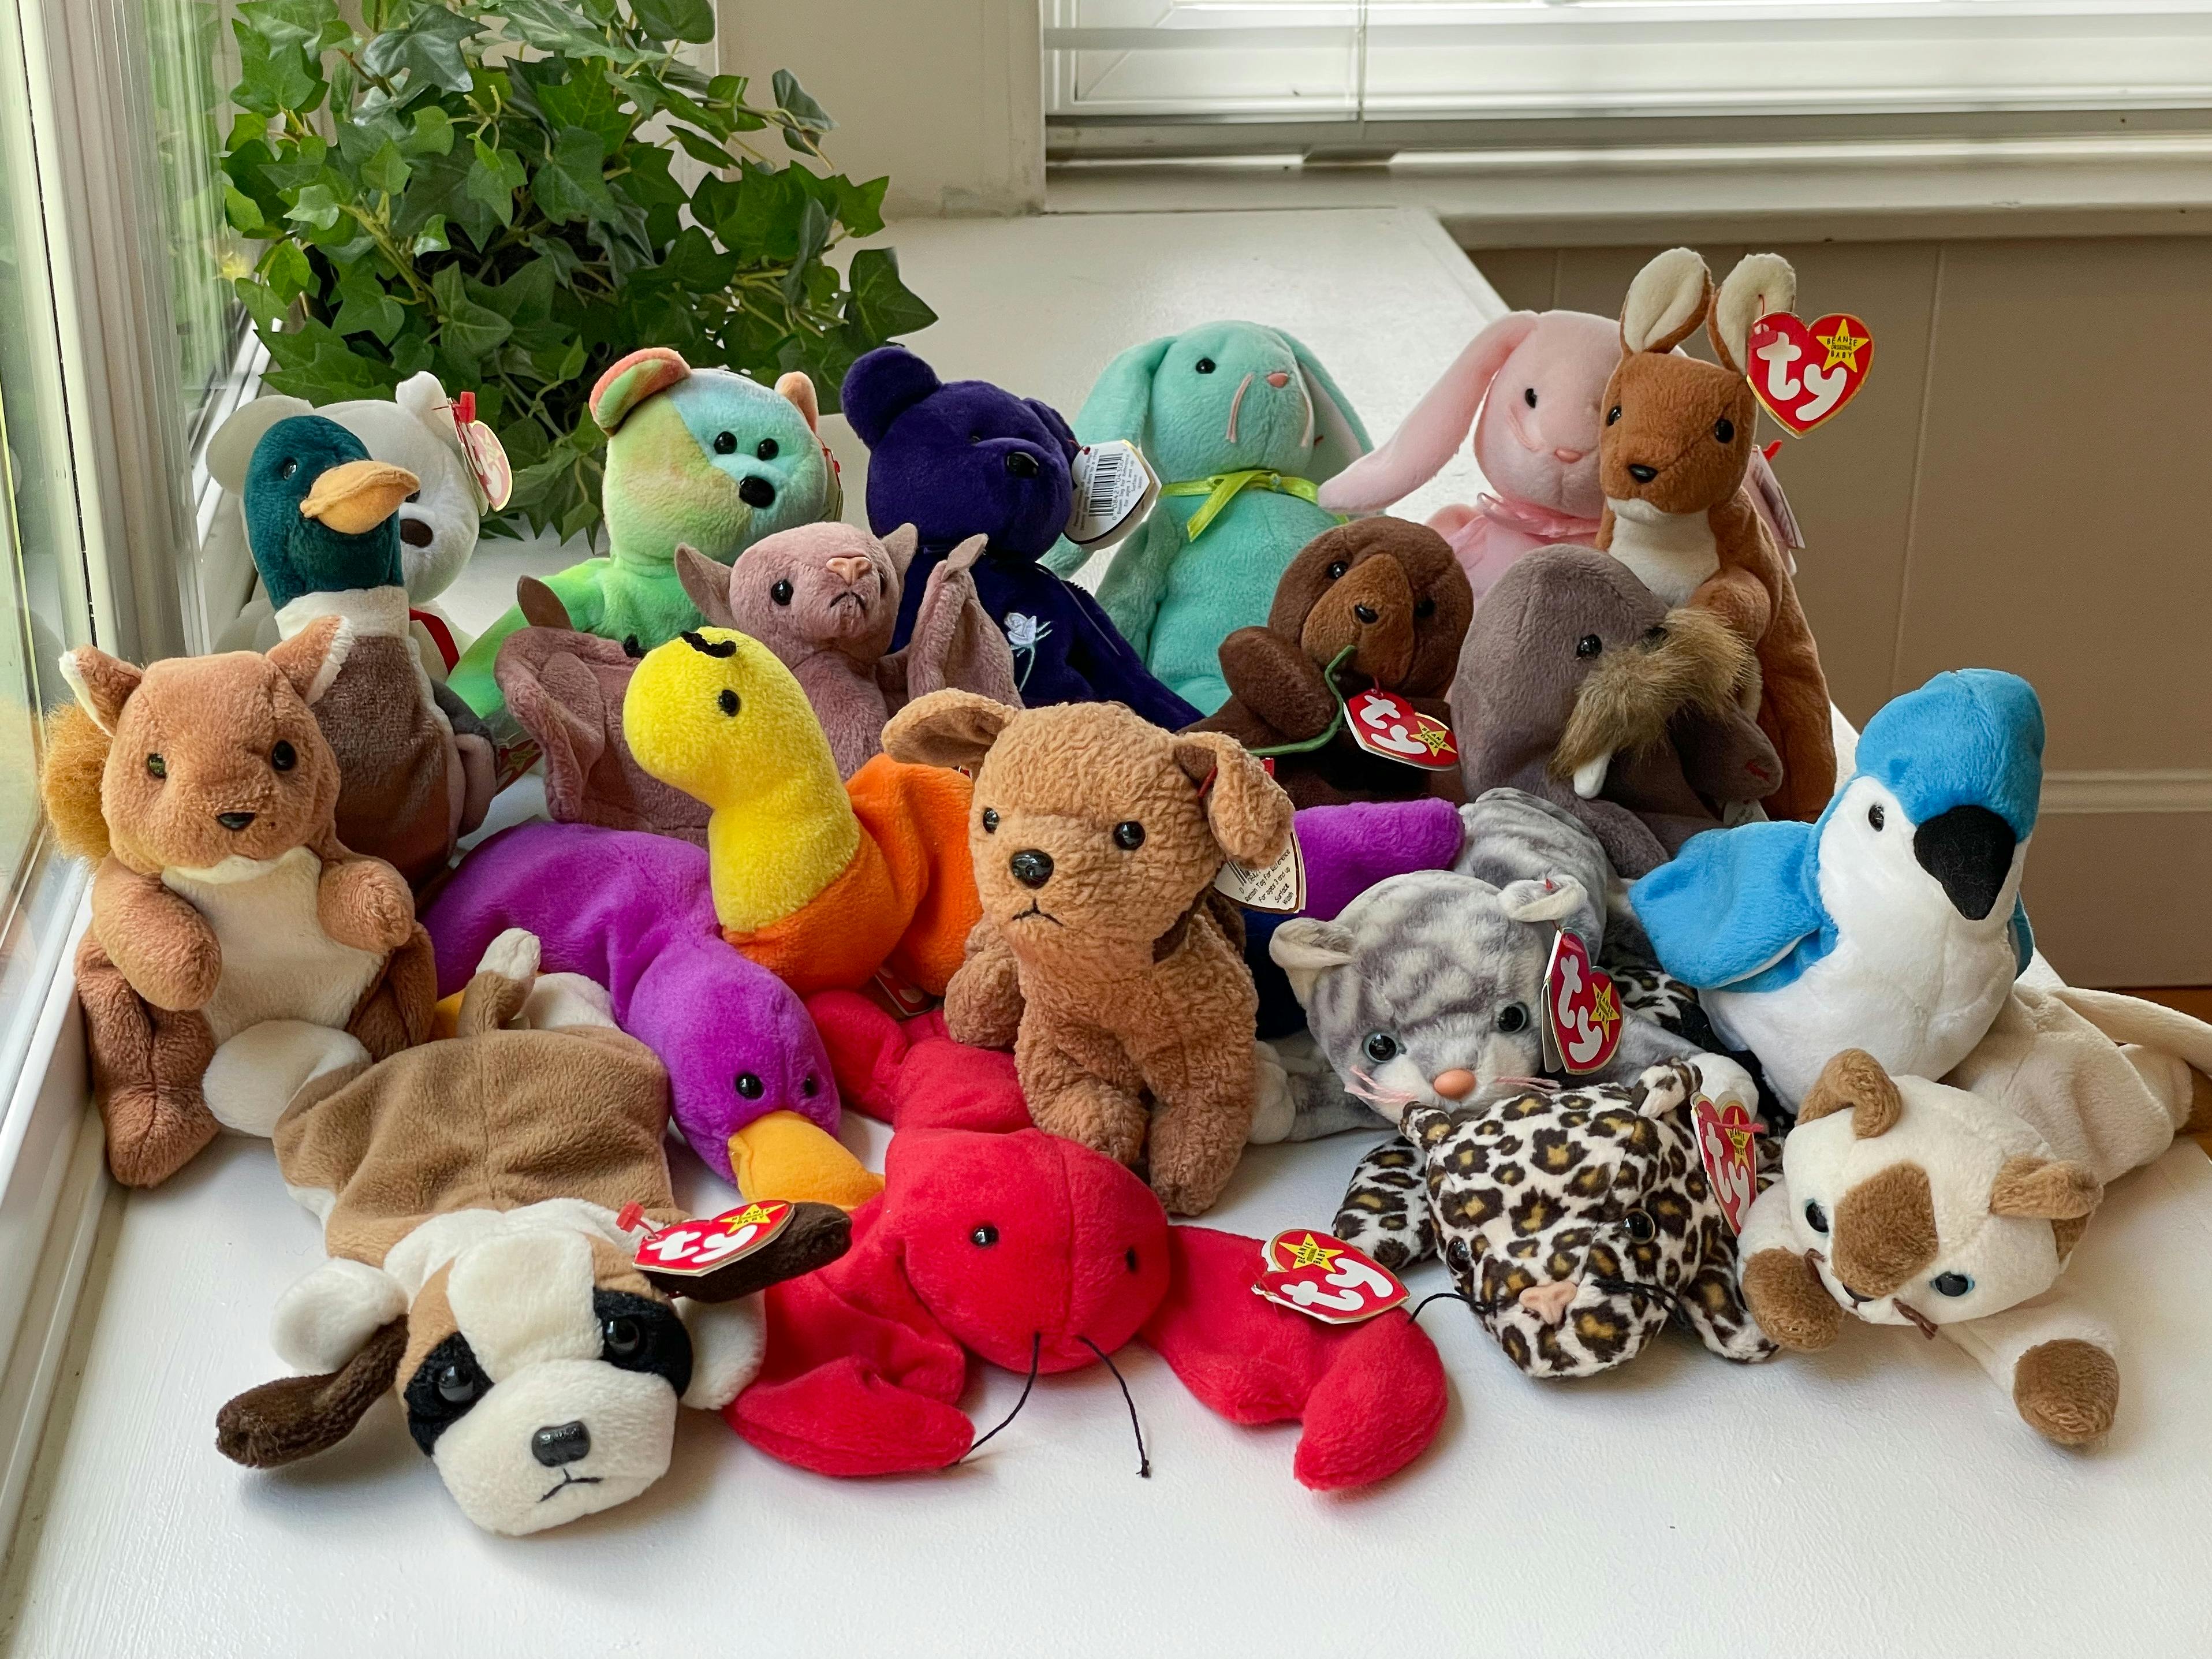 Ty Beanie Babies Baby Group Rare Collectible Valuable Stuffed Animals 90s Toys Ty Kcl Original 2022 1 1659993413 1659993413 